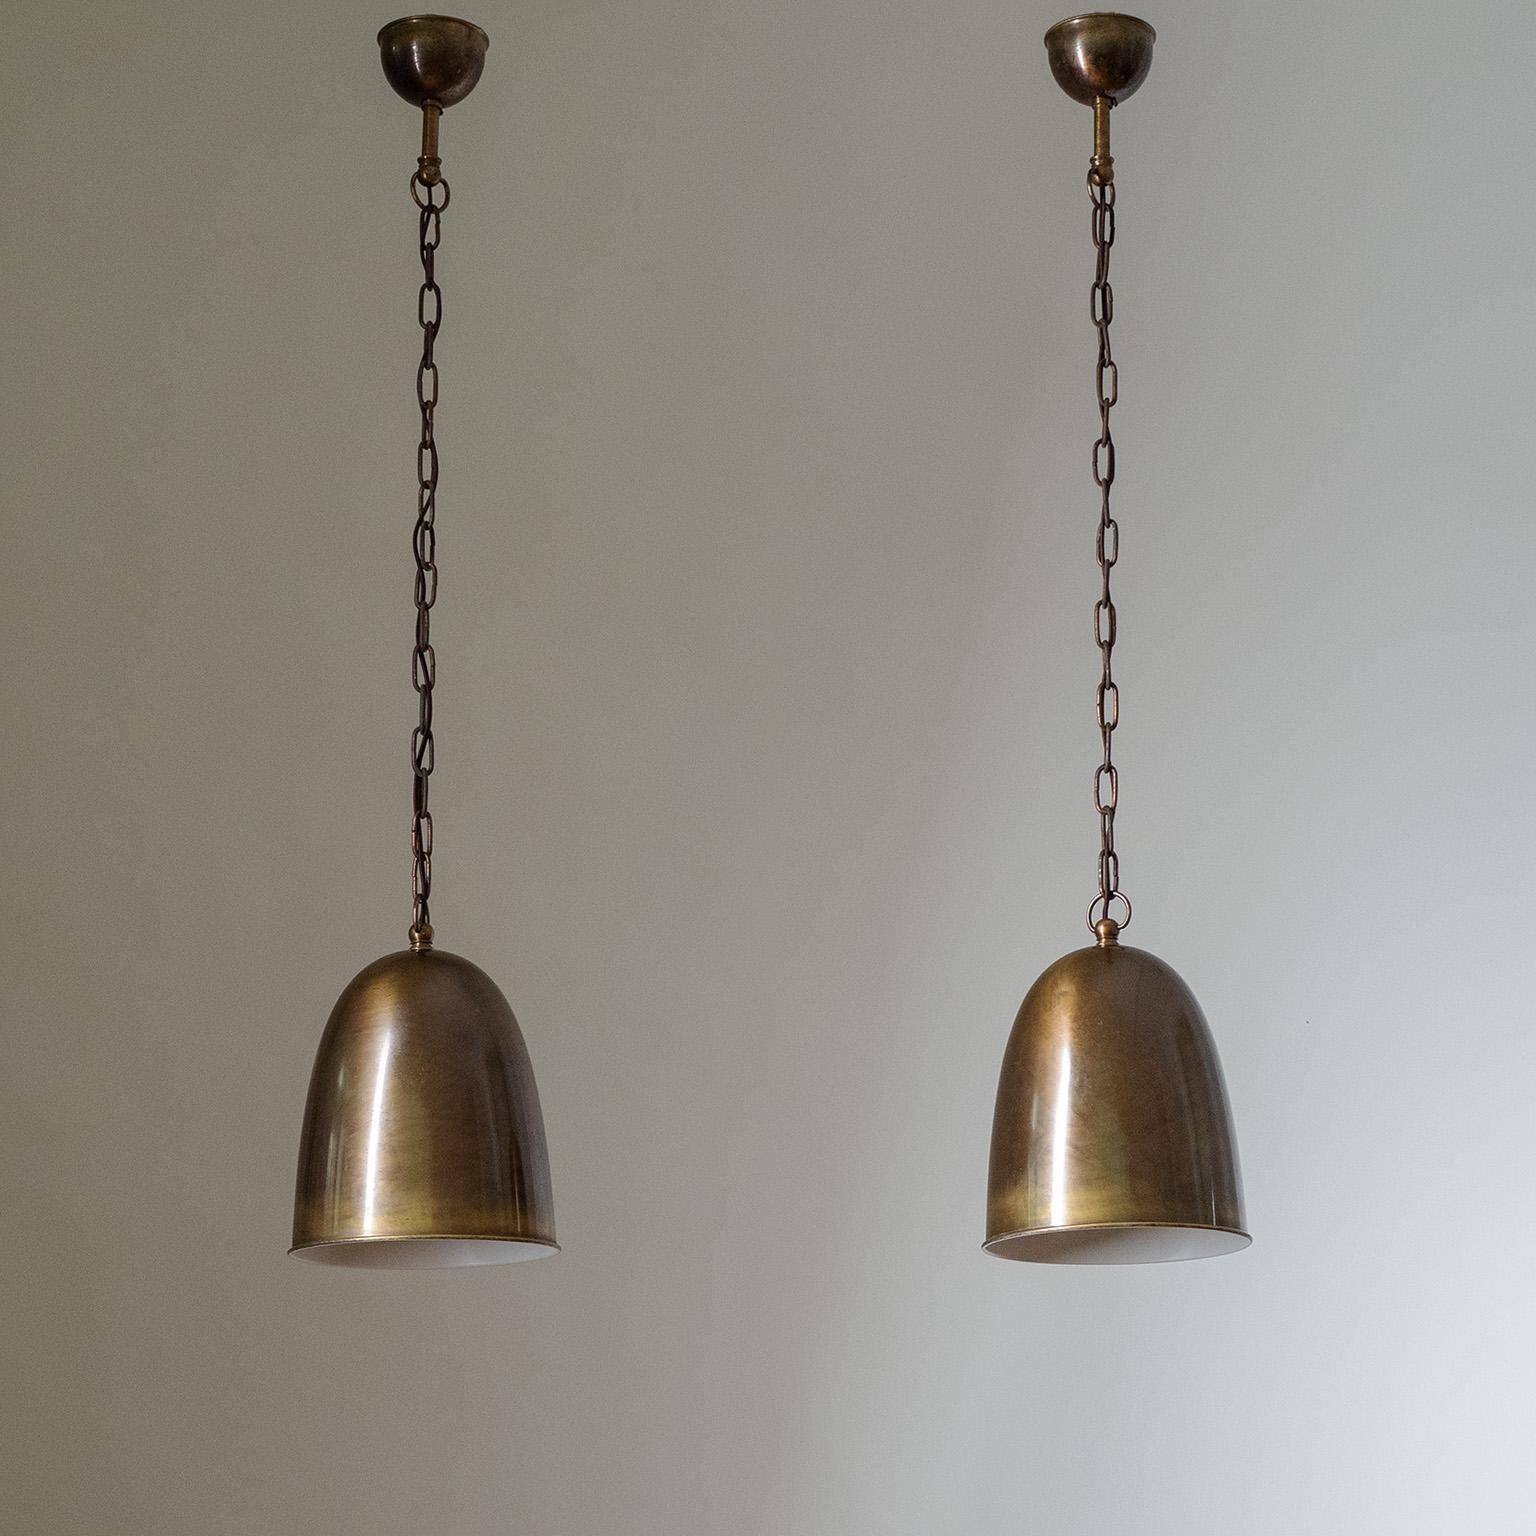 Fine pair of brass pendants from the 1930s. All brass construction with a bell-shaped shade. Nicely aged patina throughout with new paint to the inside of the shades. One original brass and ceramic E27 socket with new wiring. Body Height 28cm